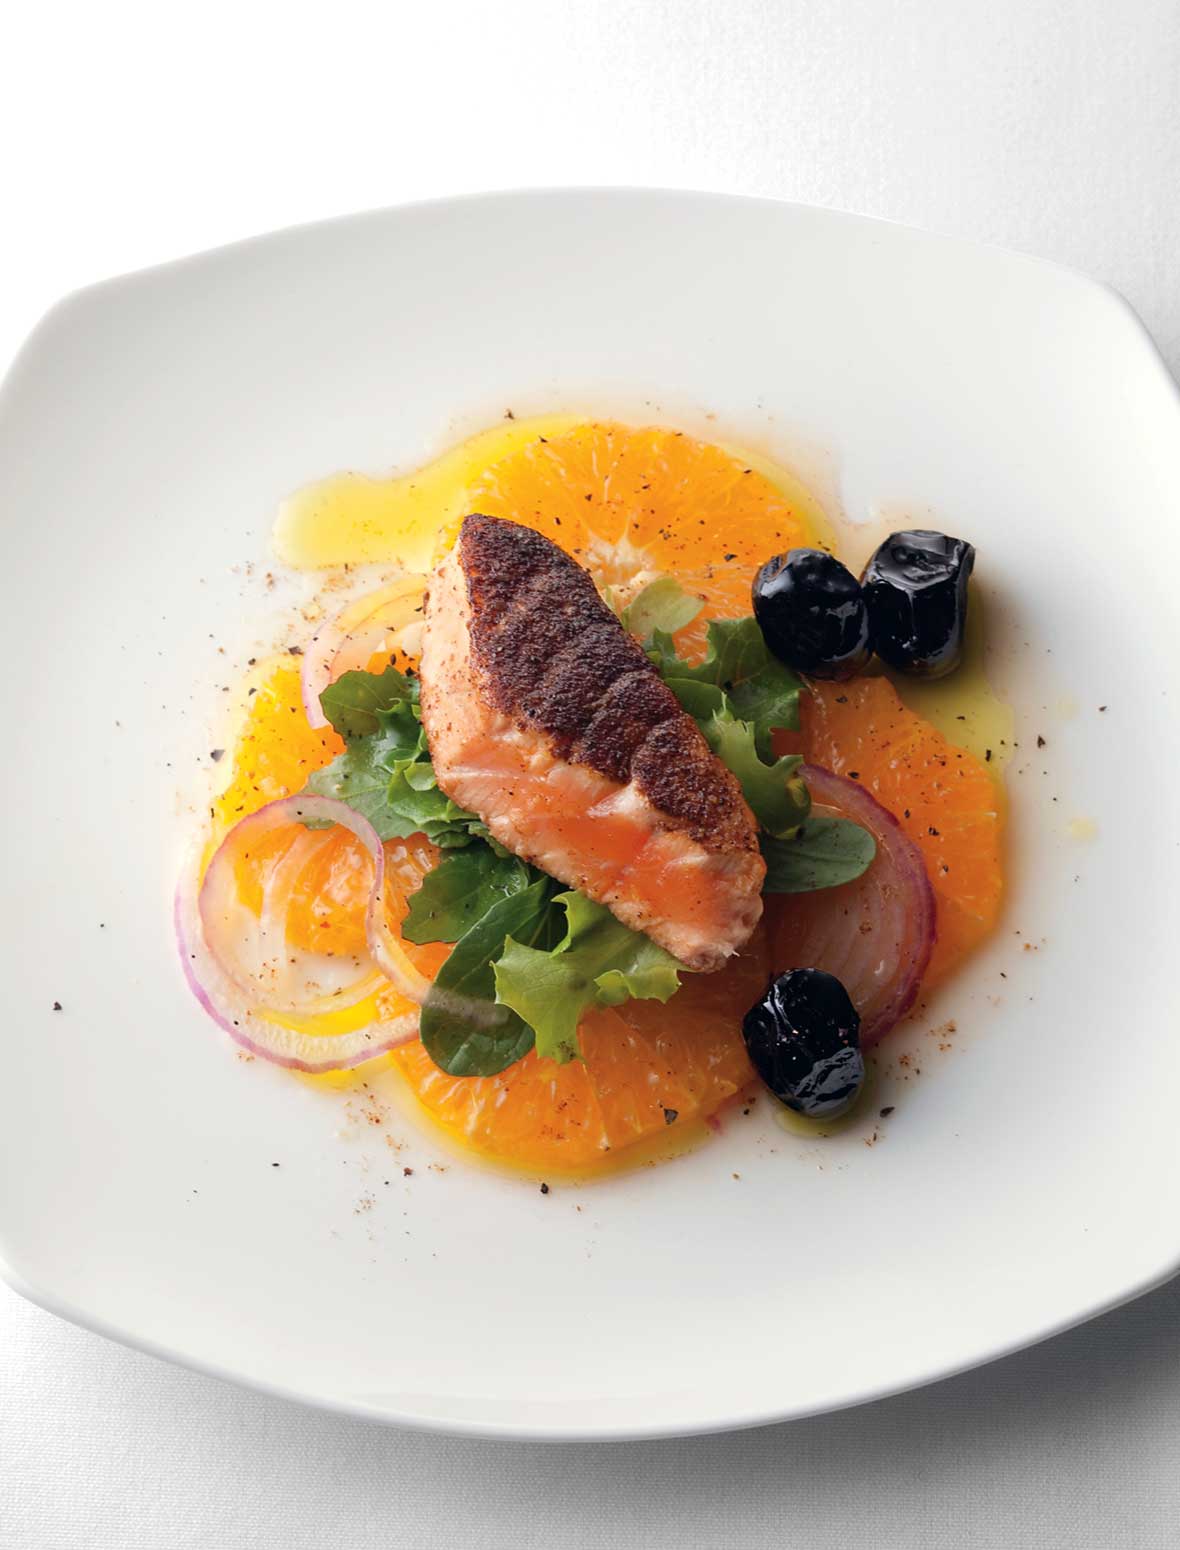 A white plate with a piece of pan-seared Moroccan salmon on a bed of orange slices, red onion, and greens with three black olives on the side.